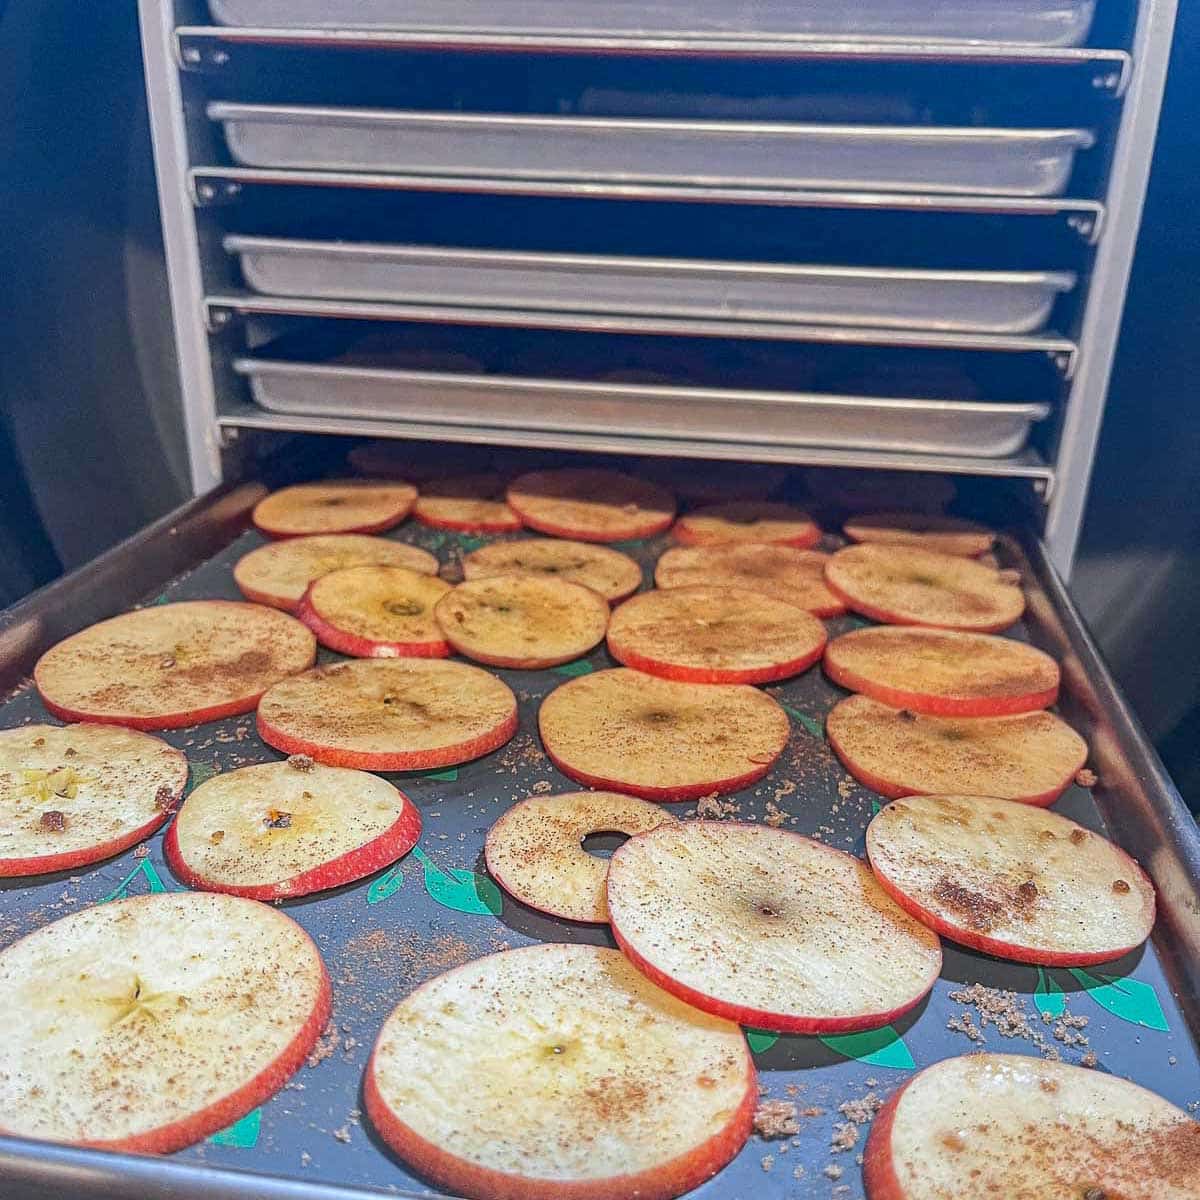 apple slices going into freeze dryer